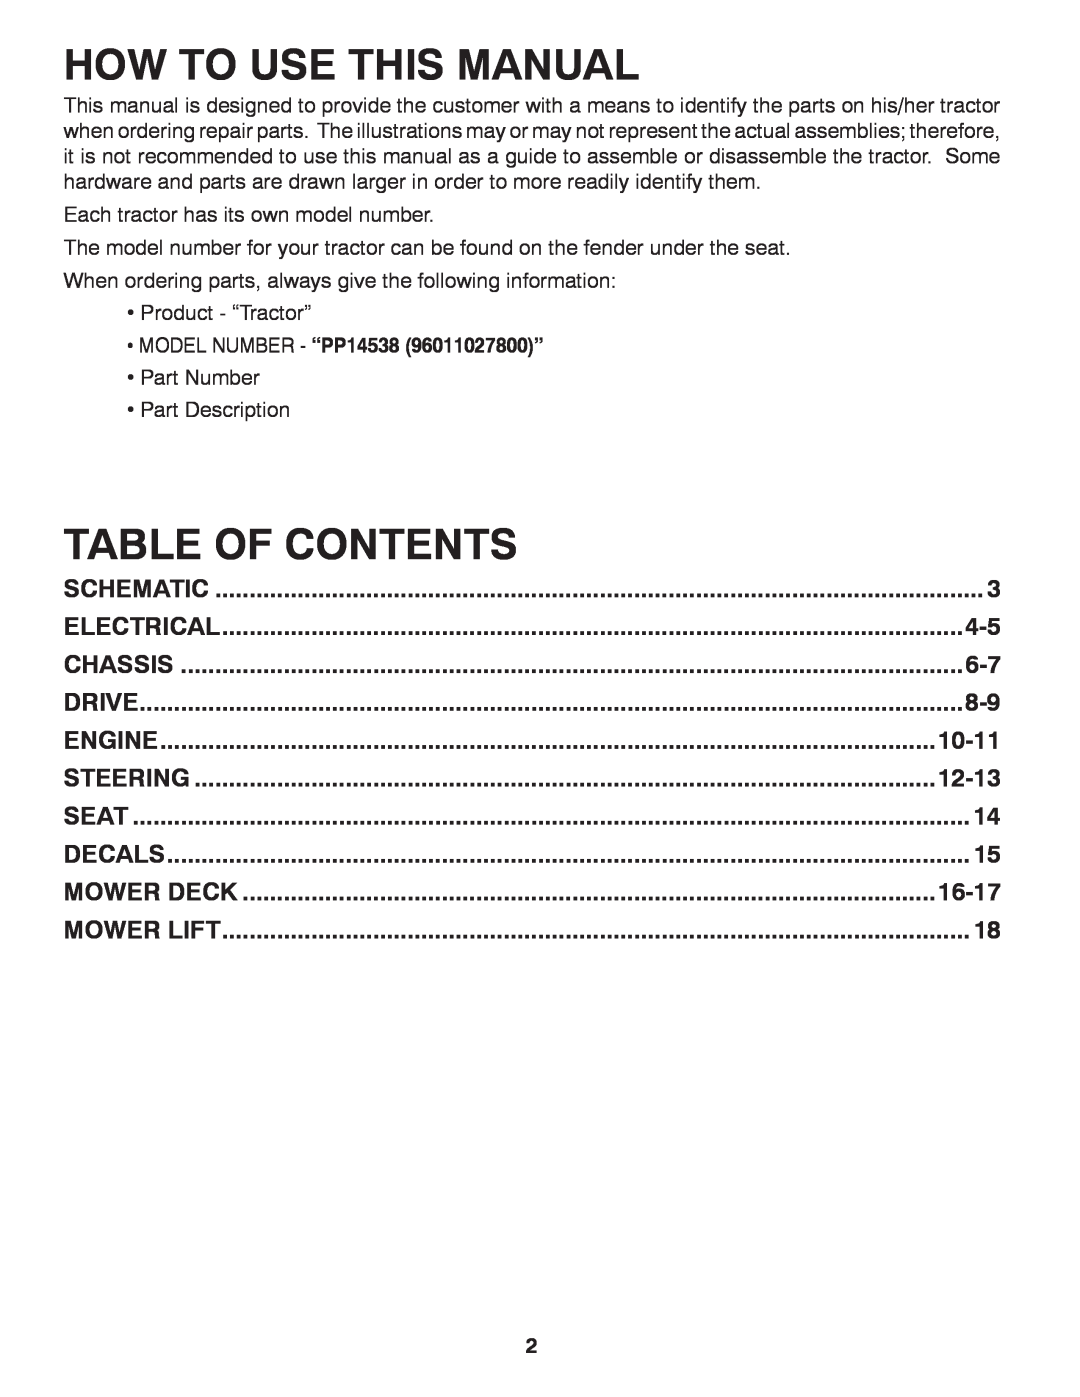 Poulan 96011027800 manual How To Use This Manual, Table Of Contents, Chassis, Drive, Engine, Steering, Mower Deck 